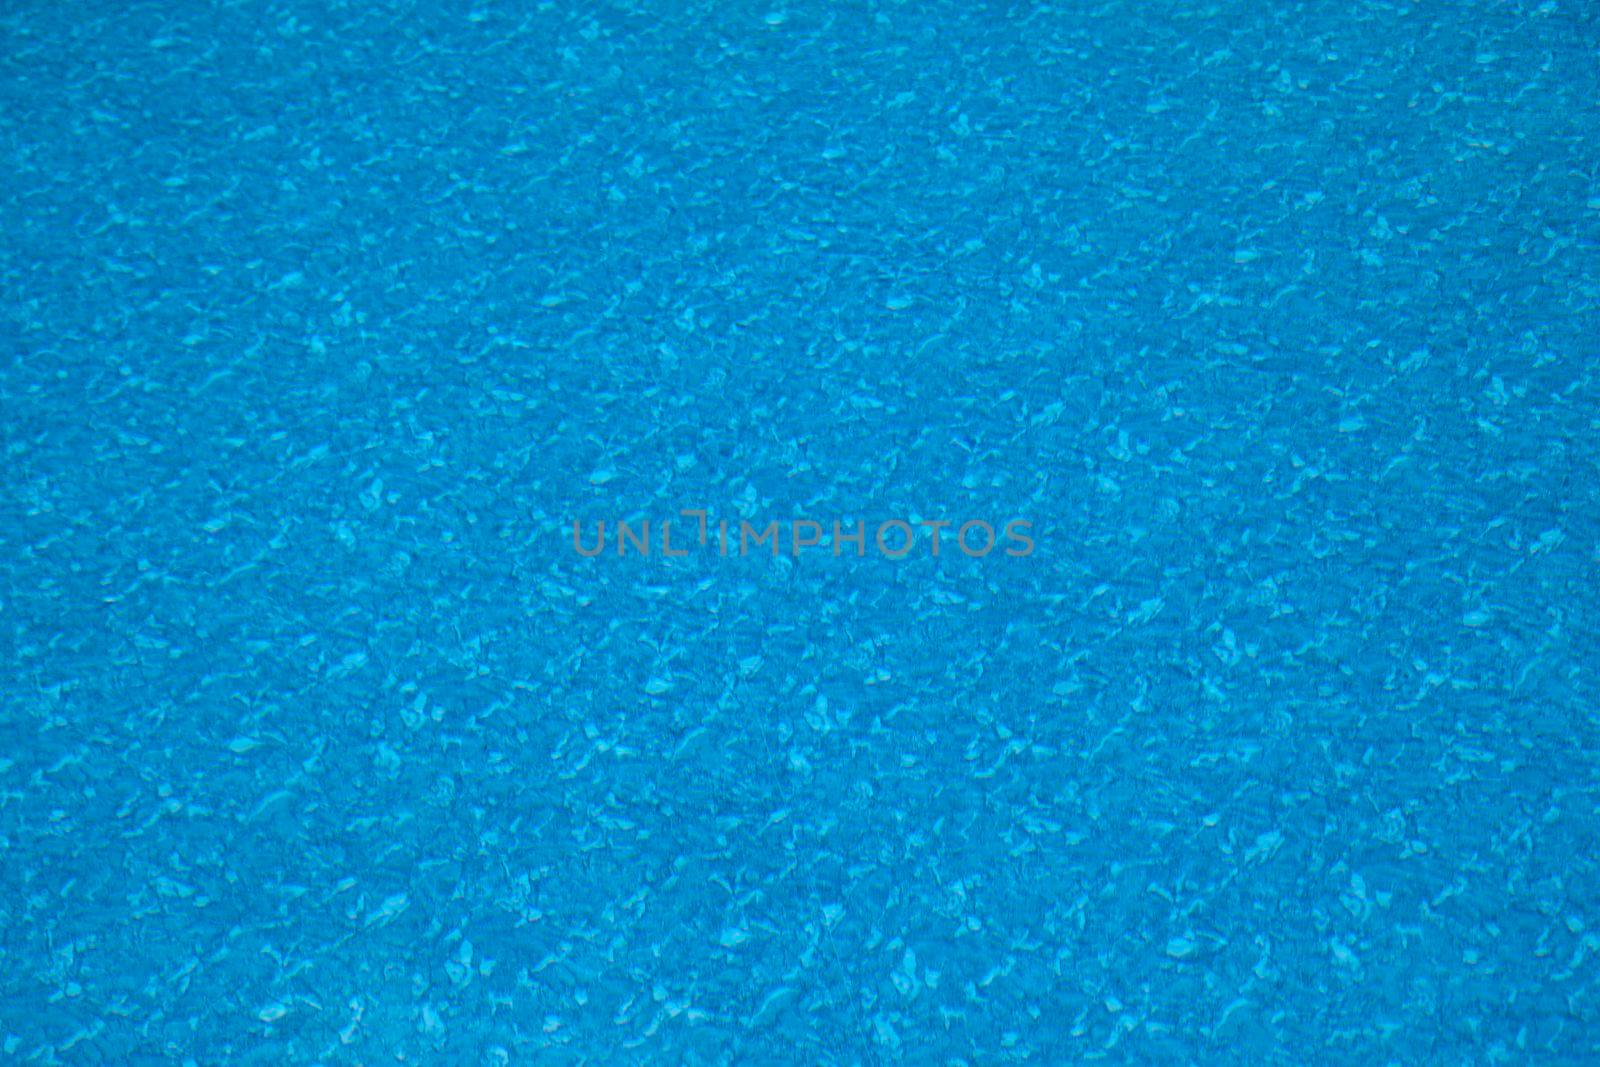 The floor or deep end of a swimming pool with underwater abstract pattern 